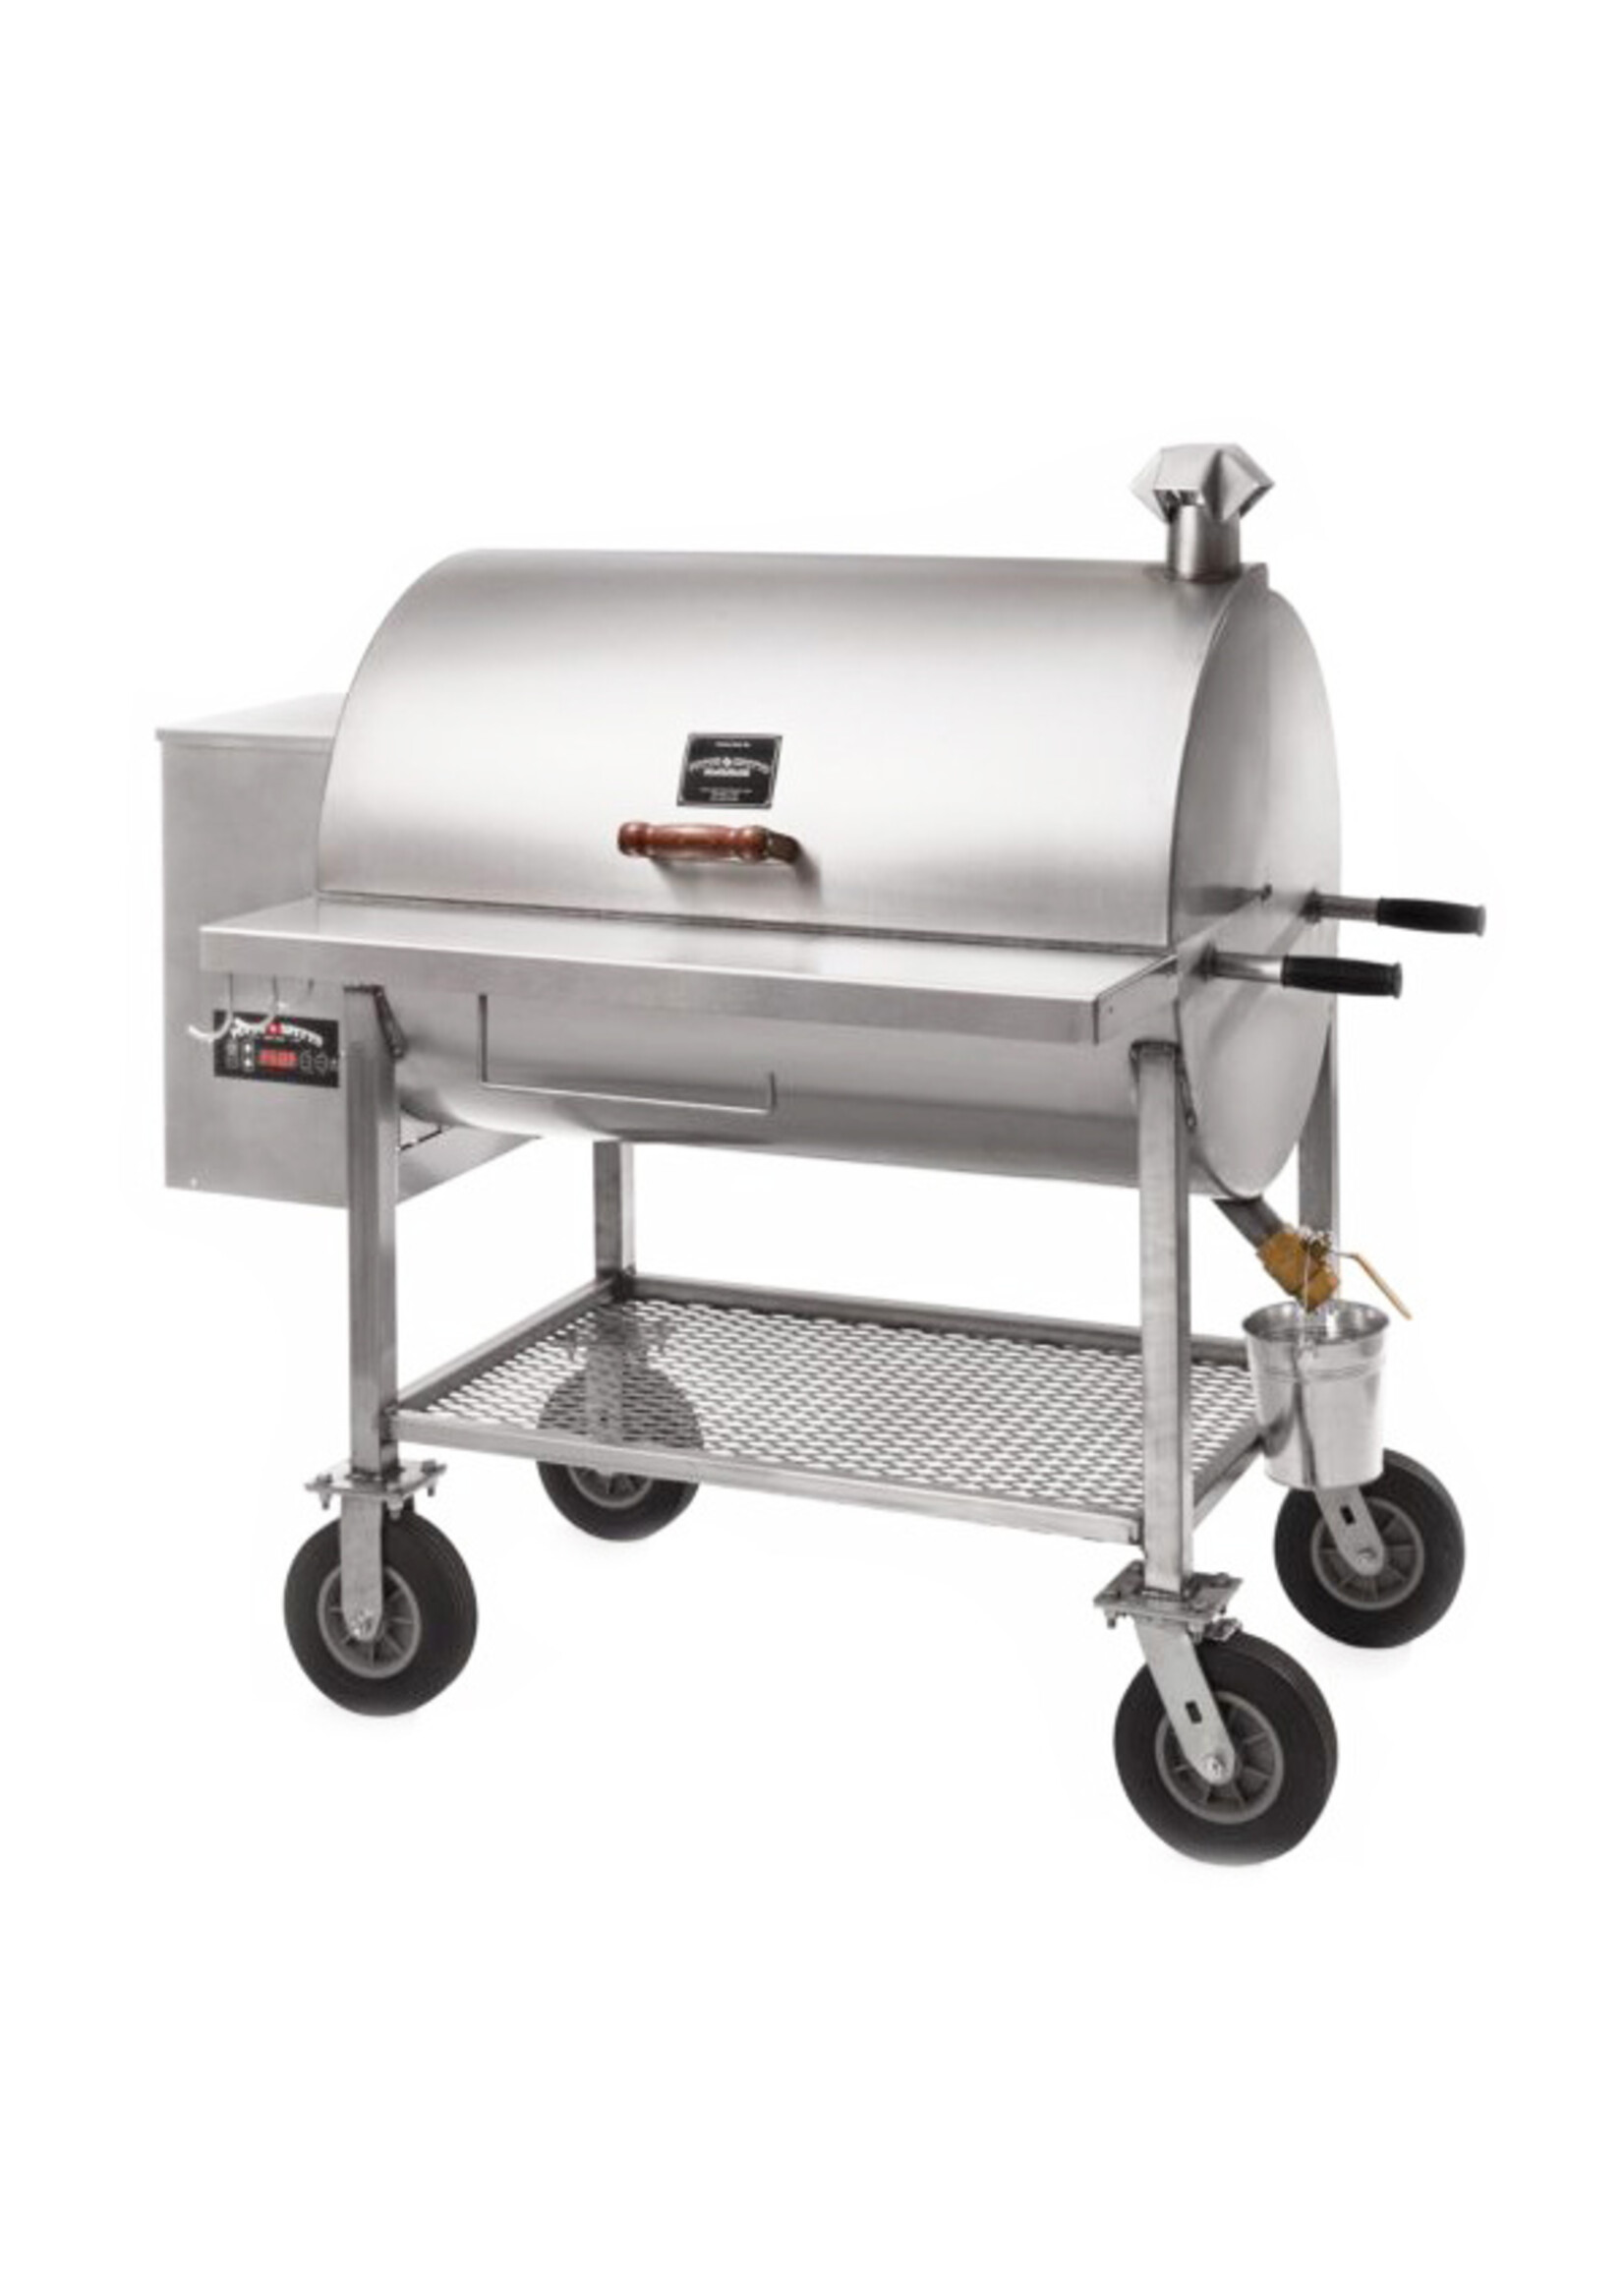 Pitts & Spitts Pitts & Spitts Maverick 1250 Pellet Grill - Stainless